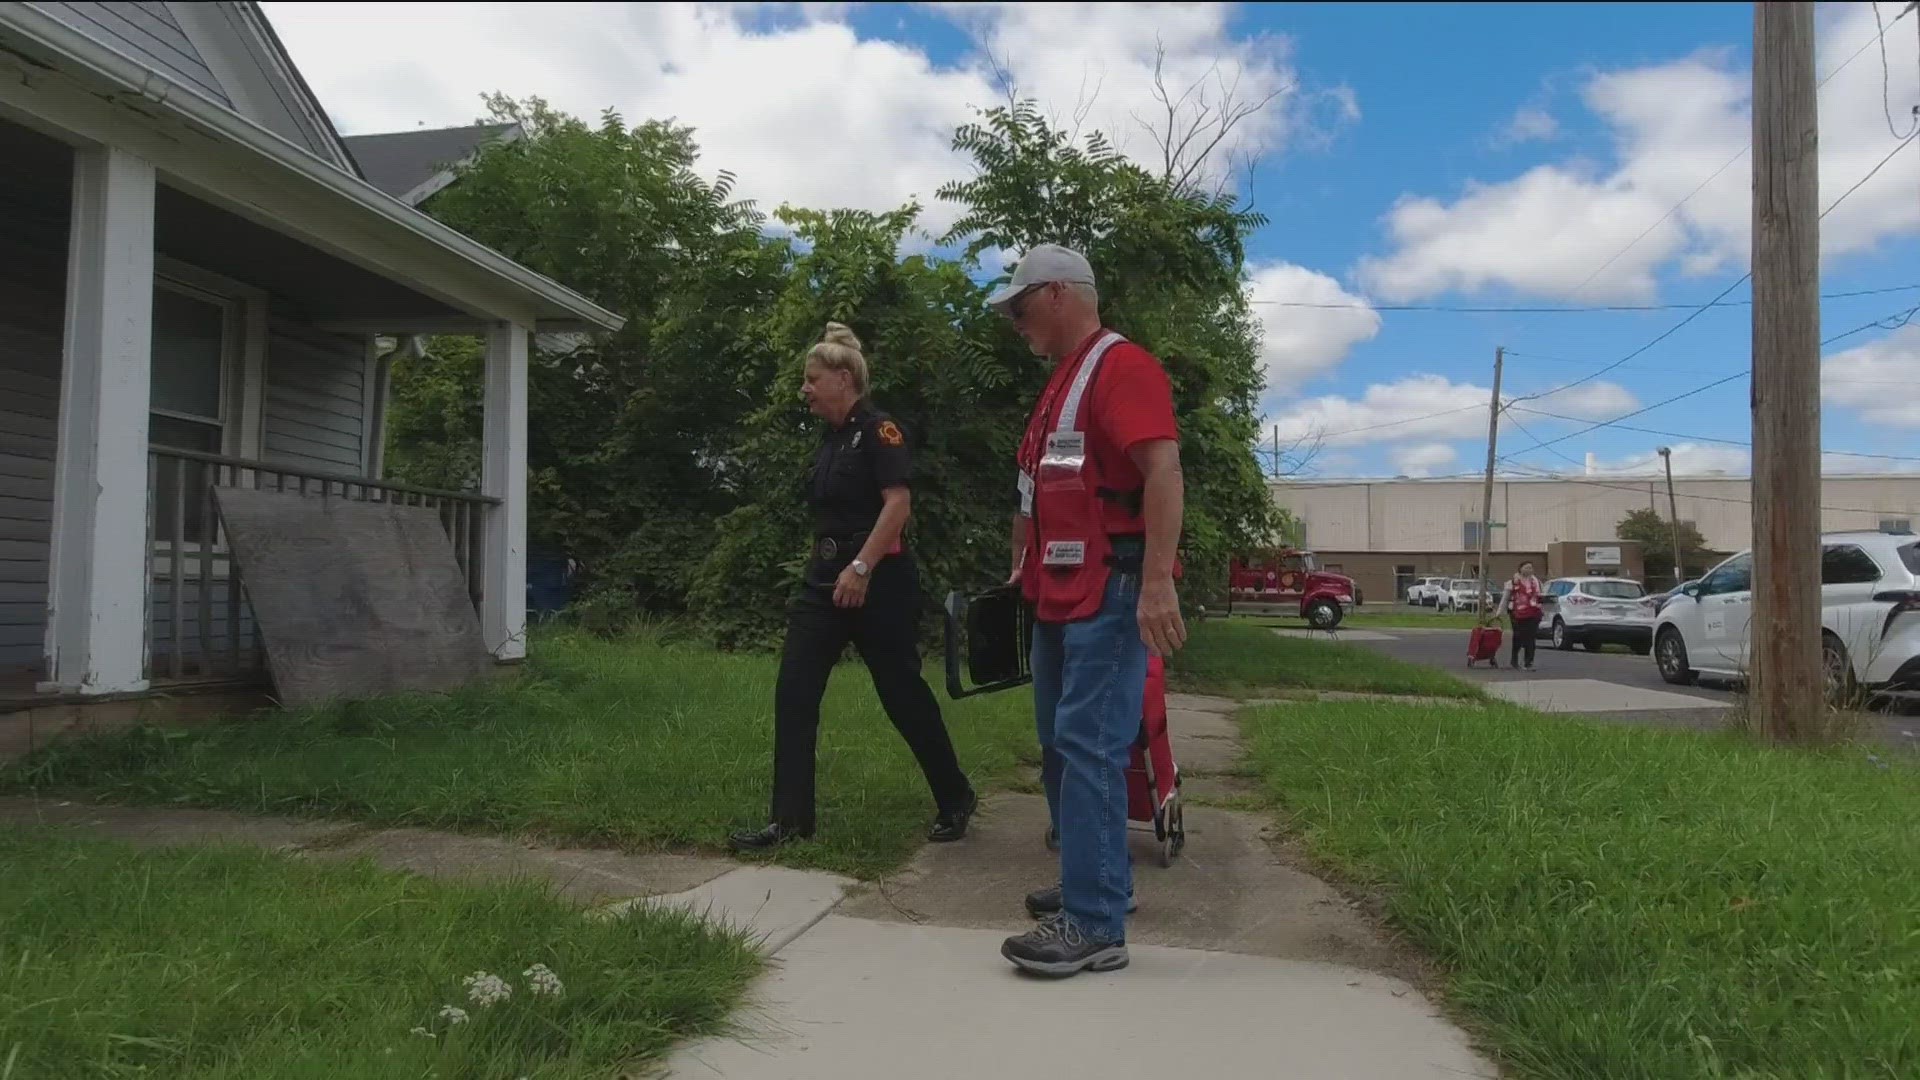 Toledo Fire & Rescue Department and American Red Cross distributed free smoke alarms and answered fire safety questions in the Klondike St. neighborhood Wednesday.